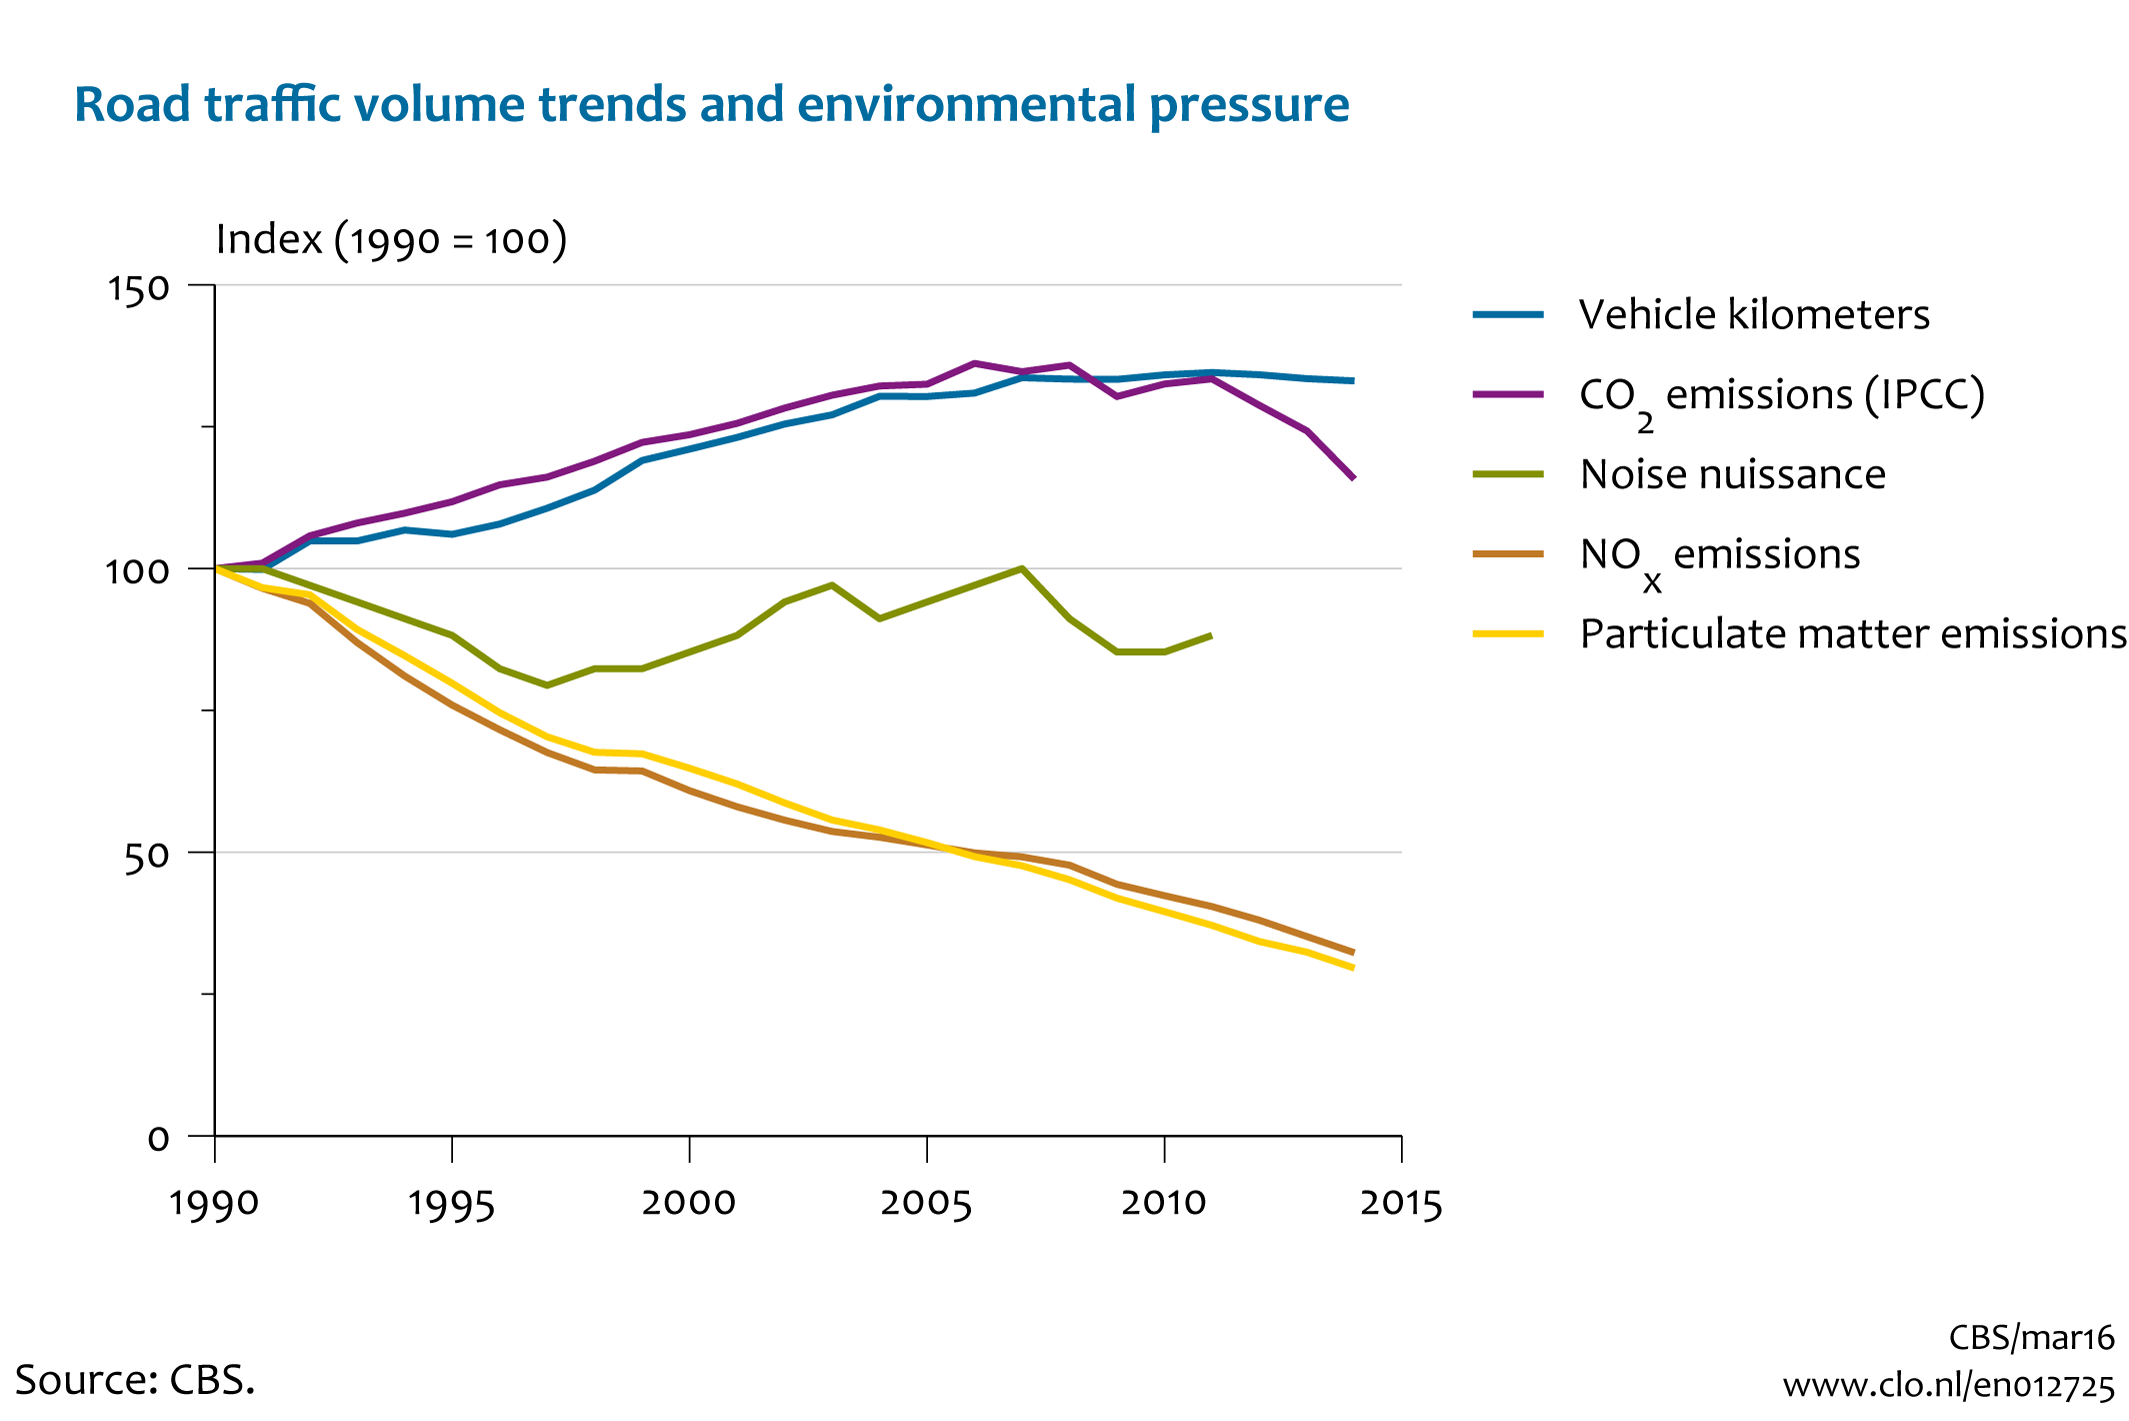 Image Road traffic volume trends and environmental pressure. The image is further explained in the text.